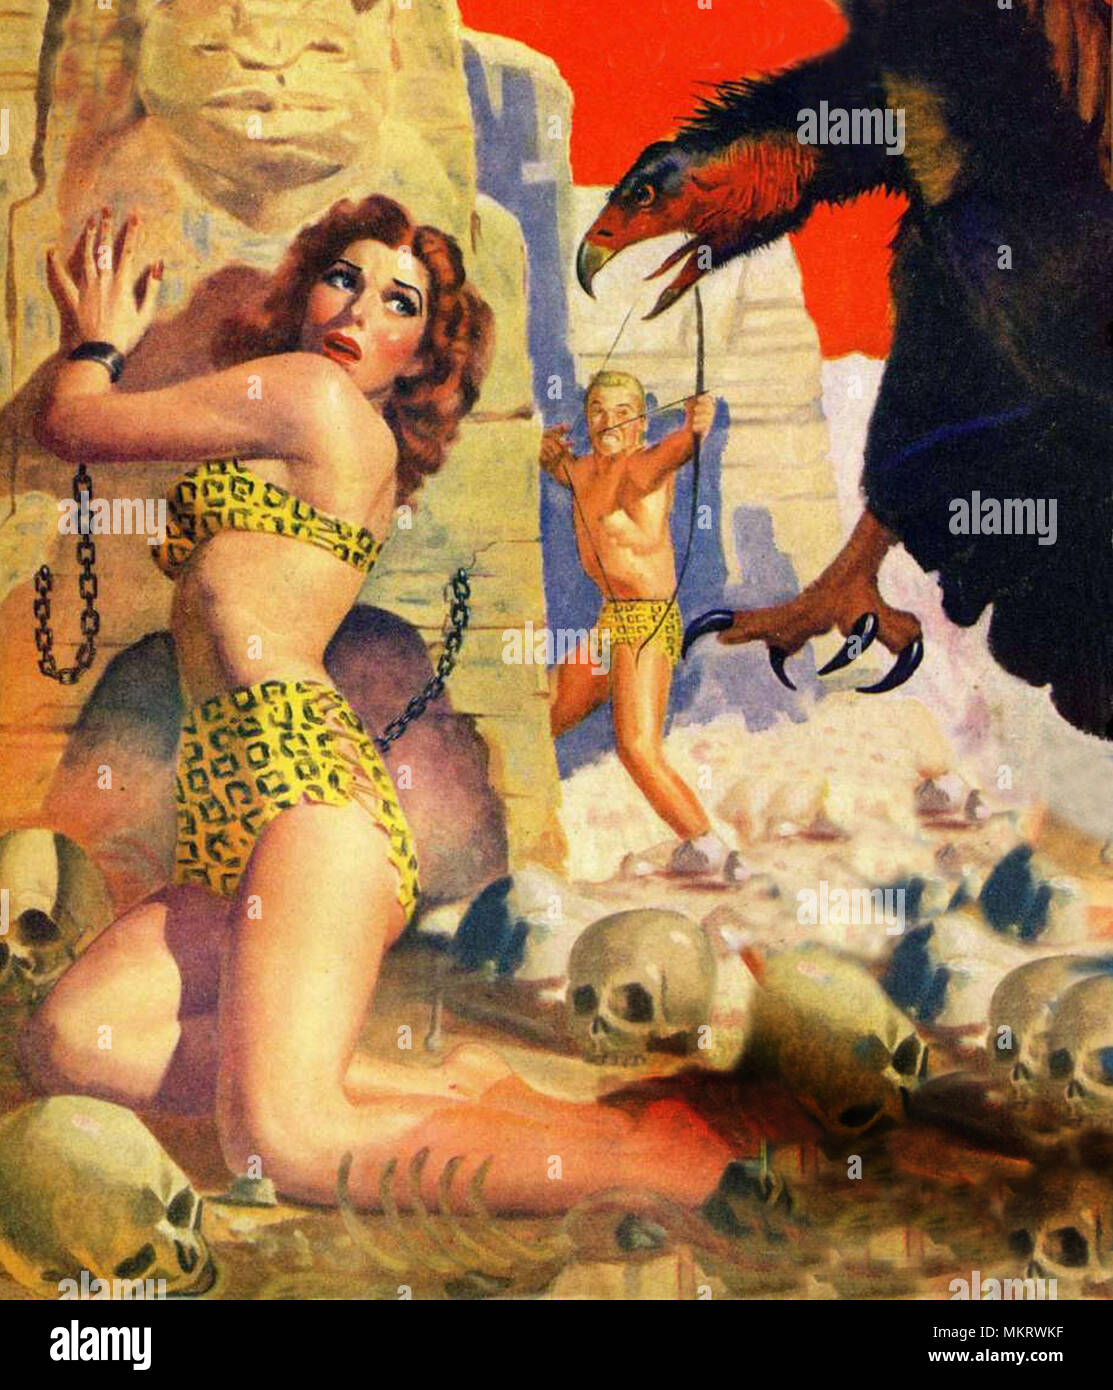 classic pulp fiction art featuring barbarians, animals, heroes and villains. From classic stories featuring Sheena, Gor and other characters. Great for use as fantasy novel or kindle book covers etc Stock Photo